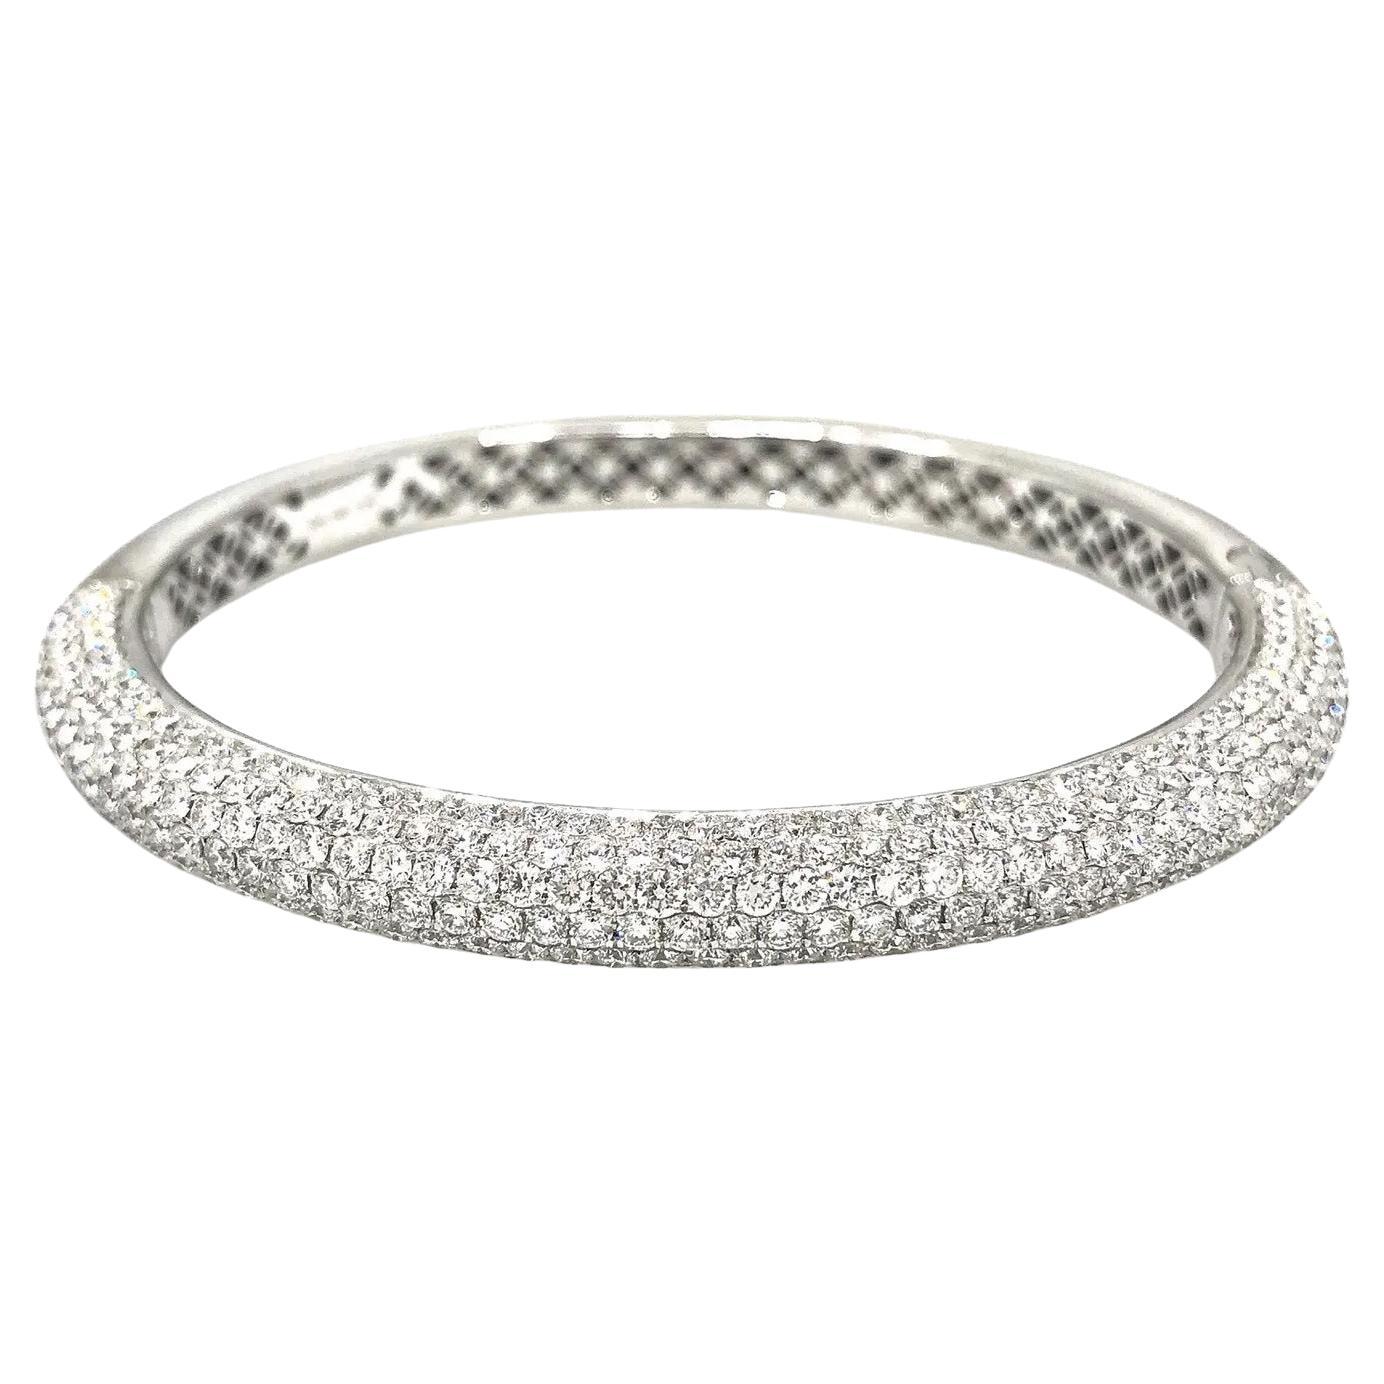 Diamond Pave Bangle Bracelet 8.28 Carats Total Weight in 18k White Gold For Sale